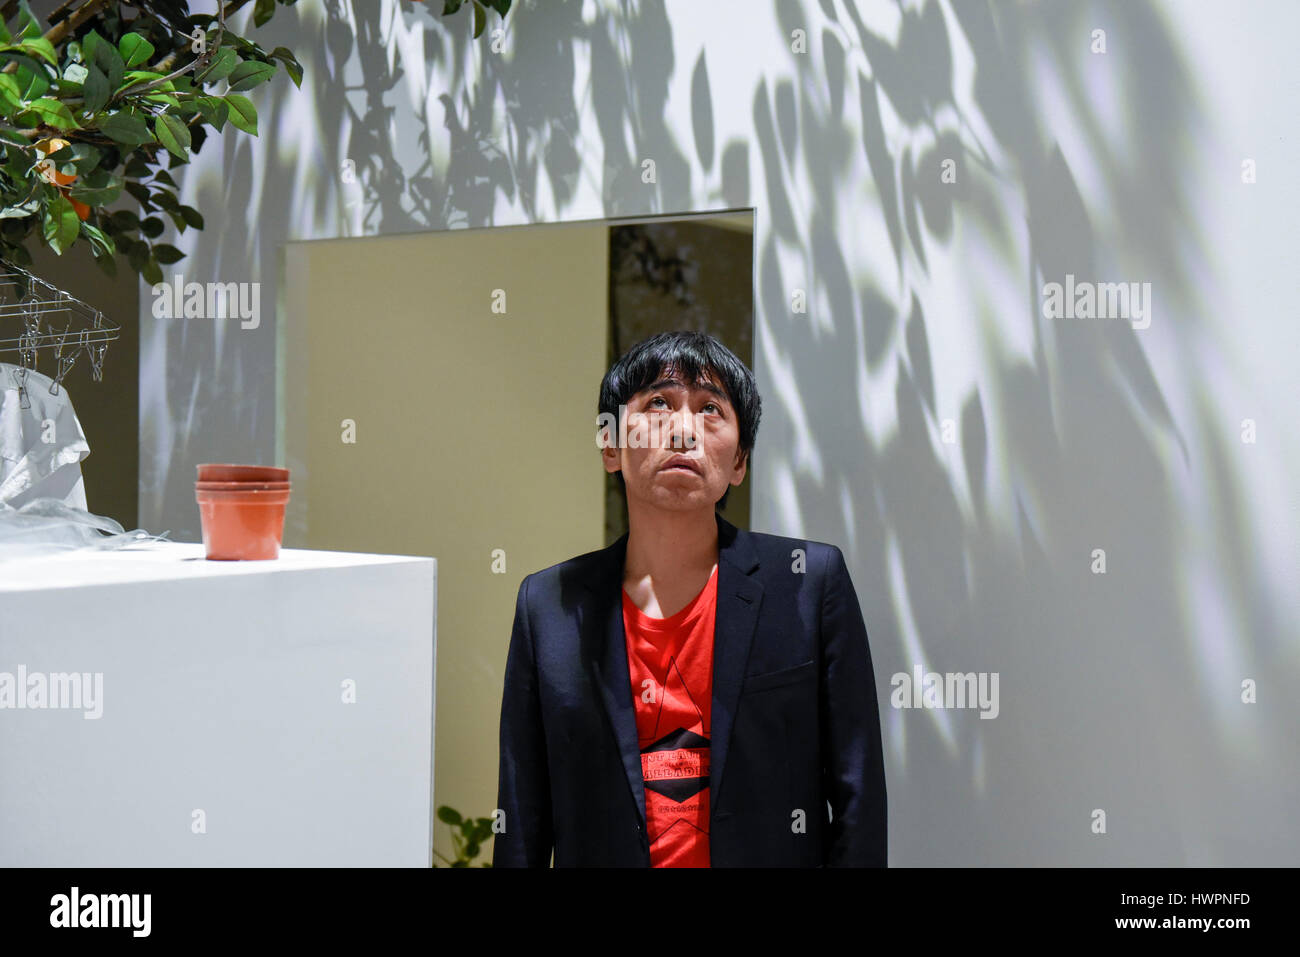 London, UK.  22 March 2017.  Pritzker-prize winning architect Ryue Nishizawa is seen inside a full size recreation of his Moriyama House, 2005.  Preview at the Barbican Centre of 'The Japanese House: Architecture and Life after 1945', the first major UK exhibition to focus on Japanese domestic architecture from the end of the Second World War to now.  The exhibition features designs from over 40 architects. Credit: Stephen Chung / Alamy Live News Stock Photo